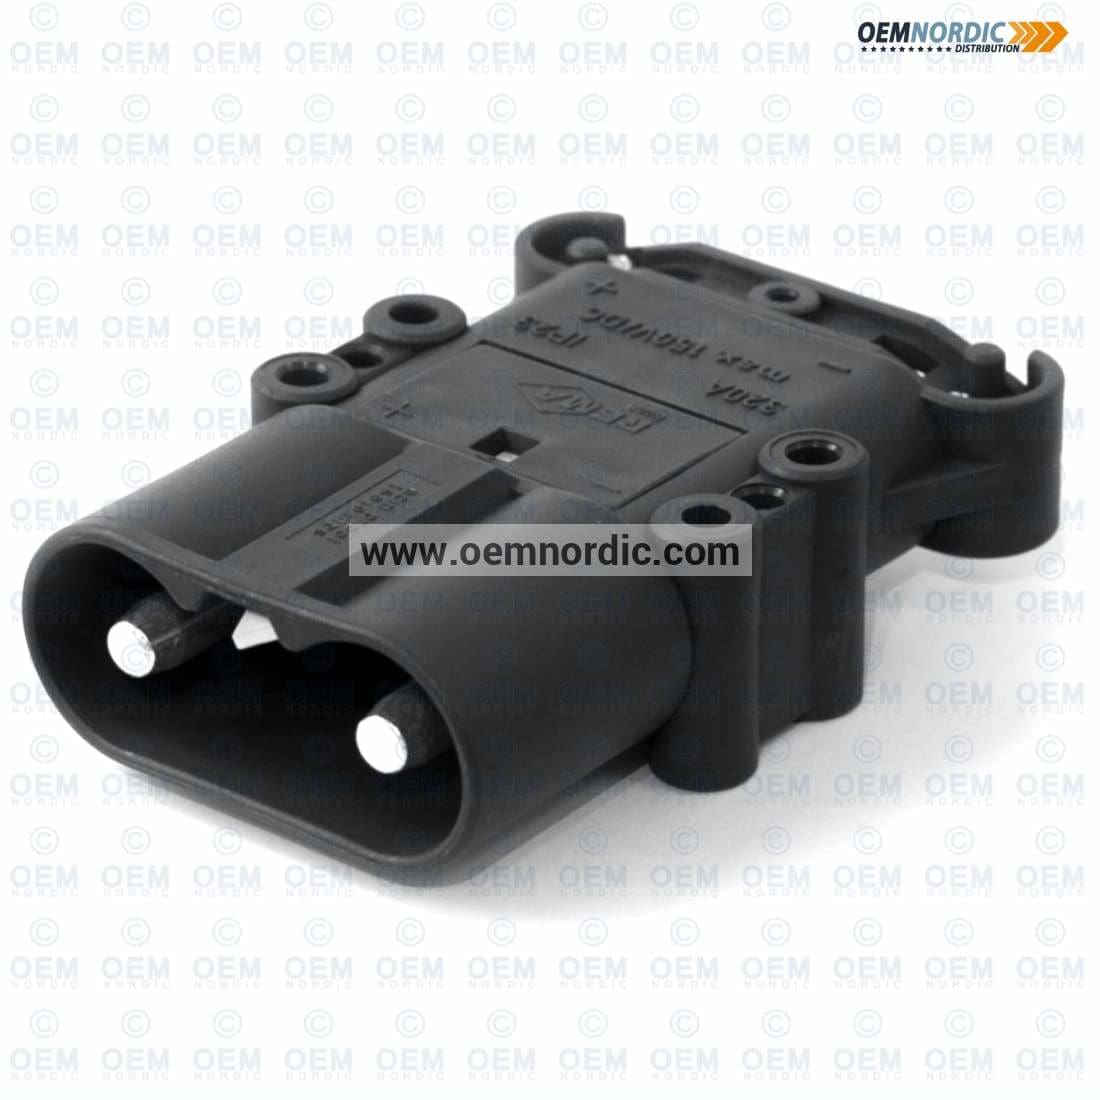 REMA BATTERY CONNECTOR DIN 320 PLUG with contacts Standard Black Housing - 50mm2